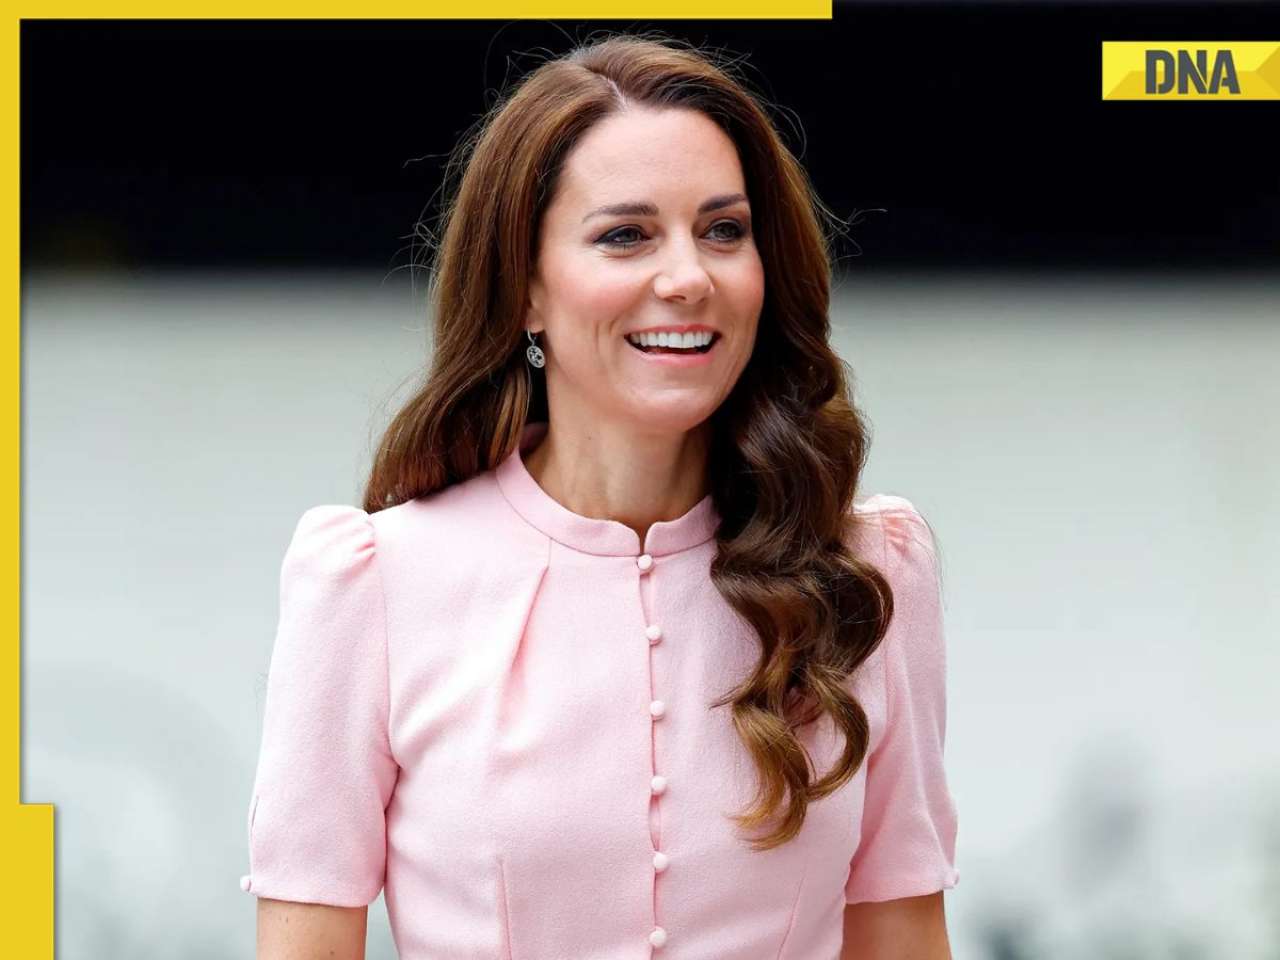 Princess Kate says she has cancer, undergoing chemotherapy, watch video message here